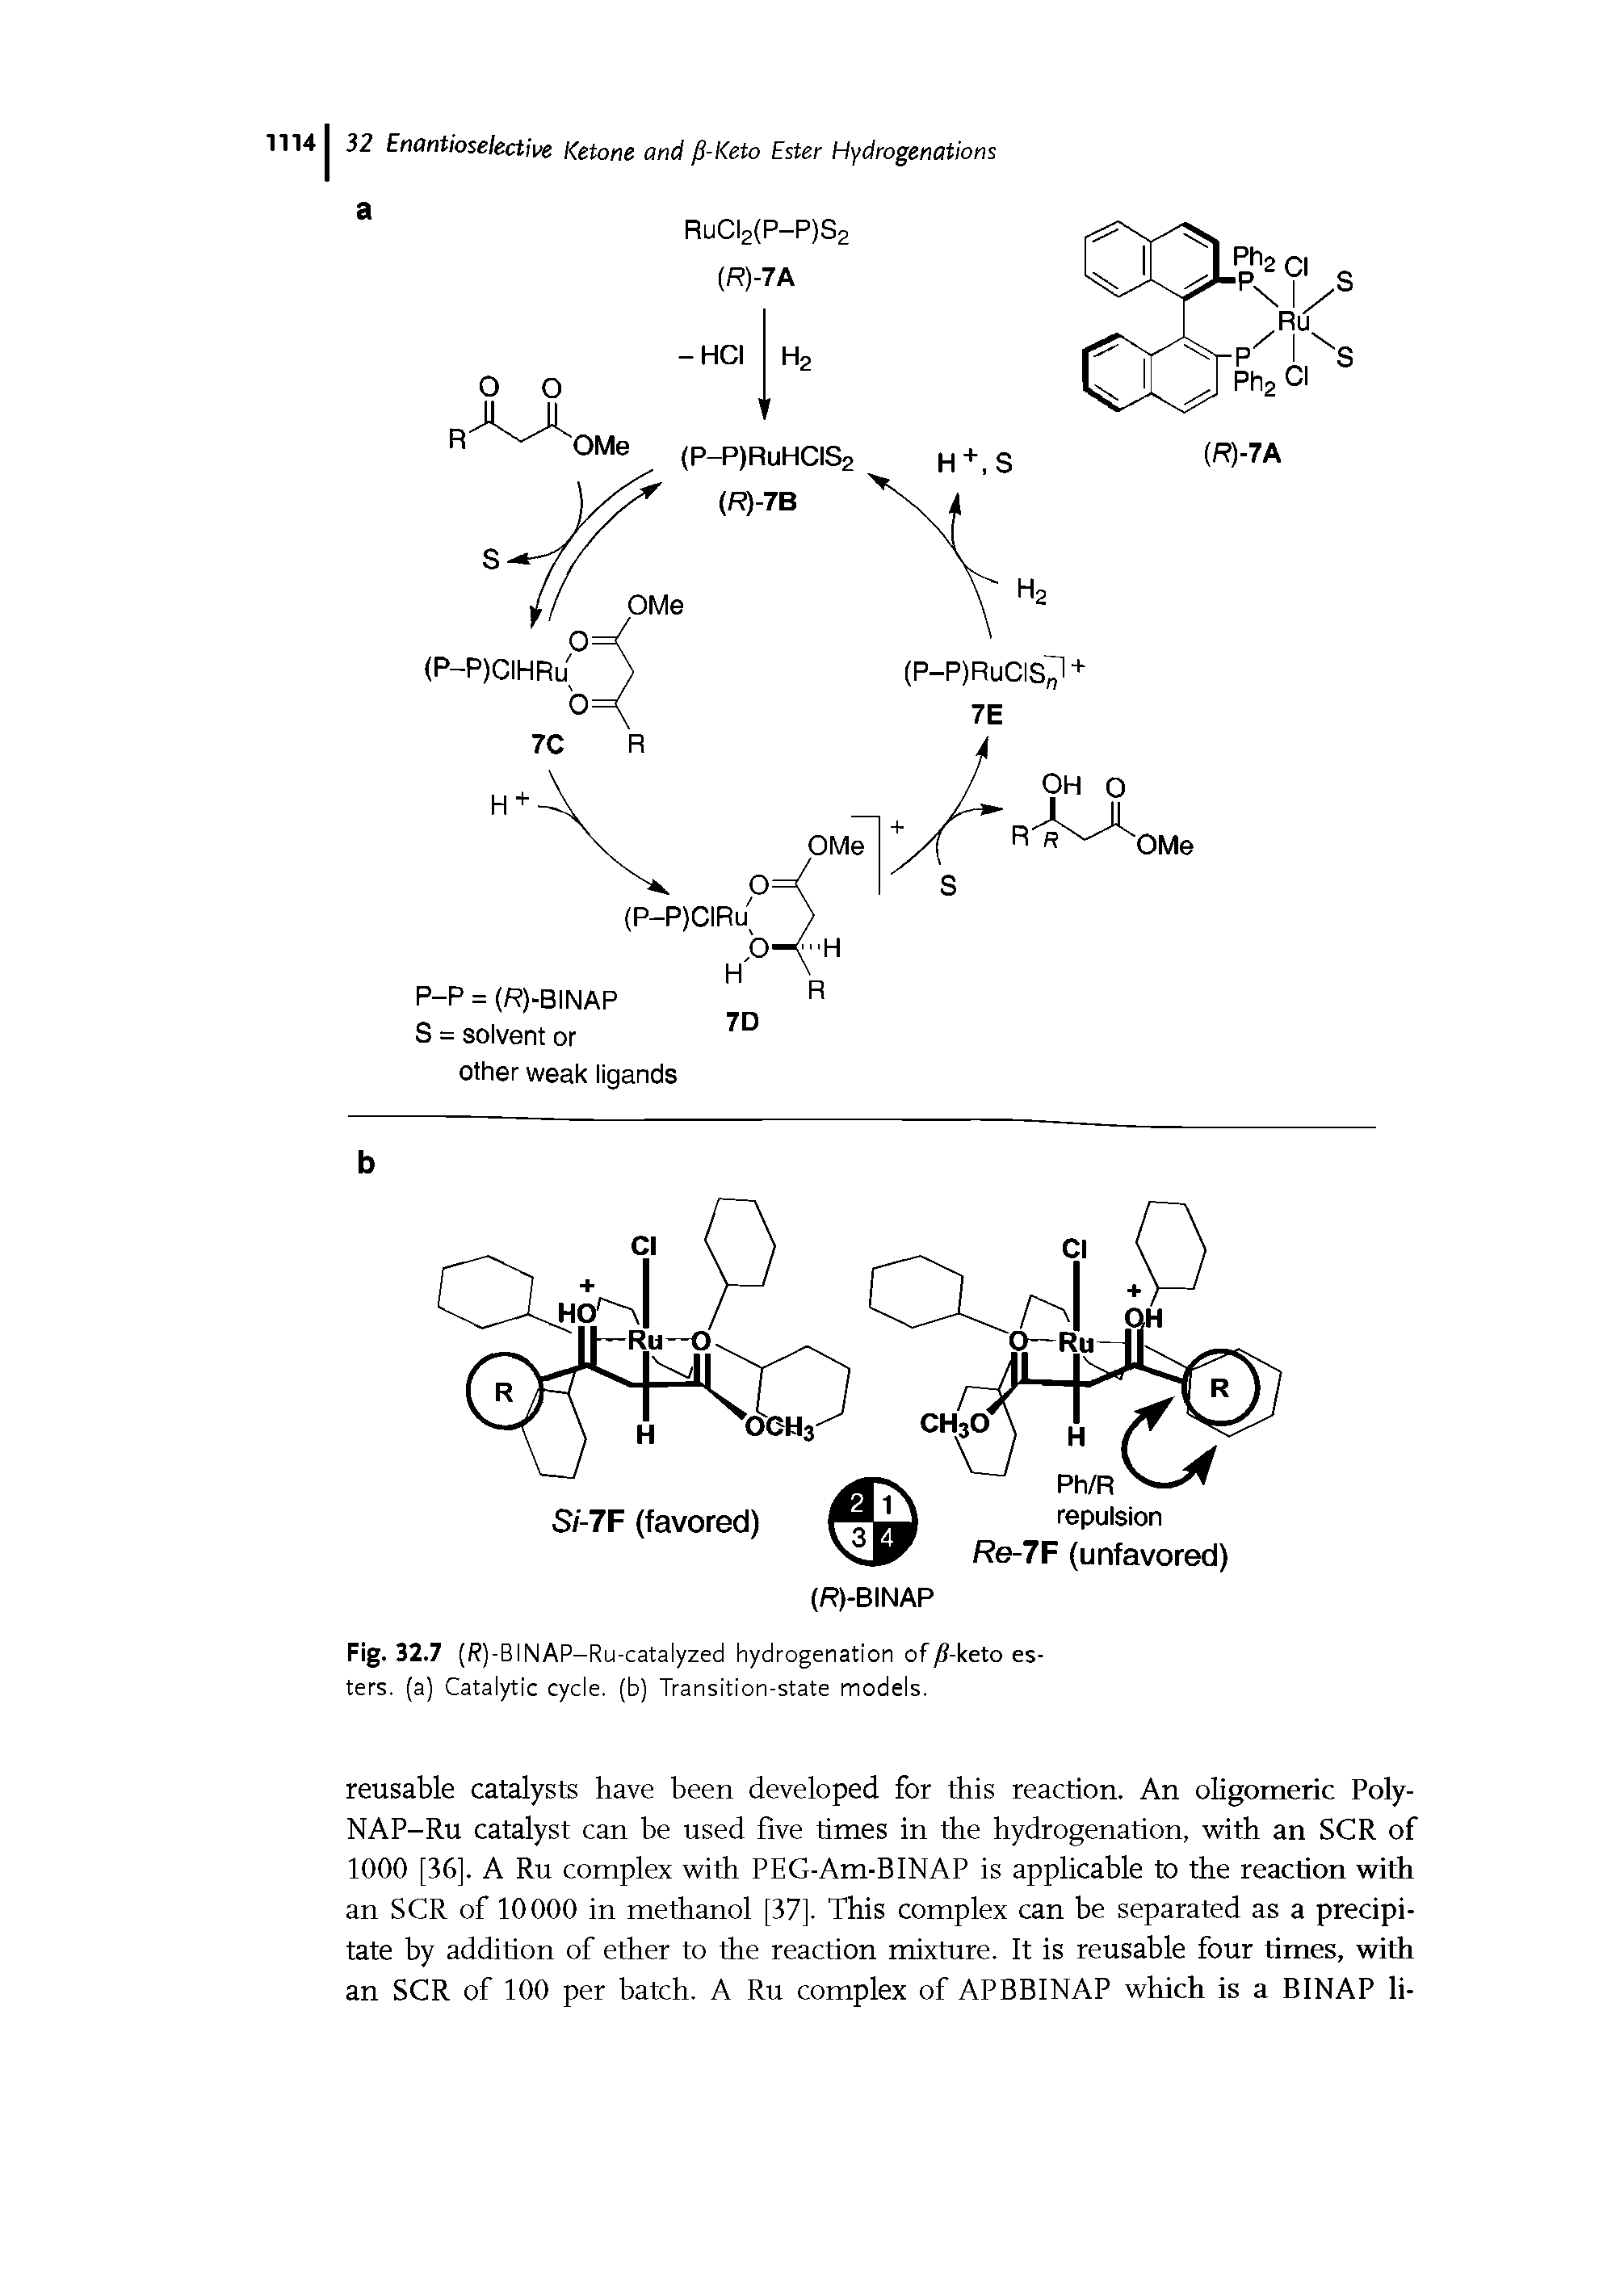 Fig. 32.7 (R)-BINAP-Ru-catalyzed hydrogenation of/ -keto esters. (a) Catalytic cycle, (b) Transition-state models.